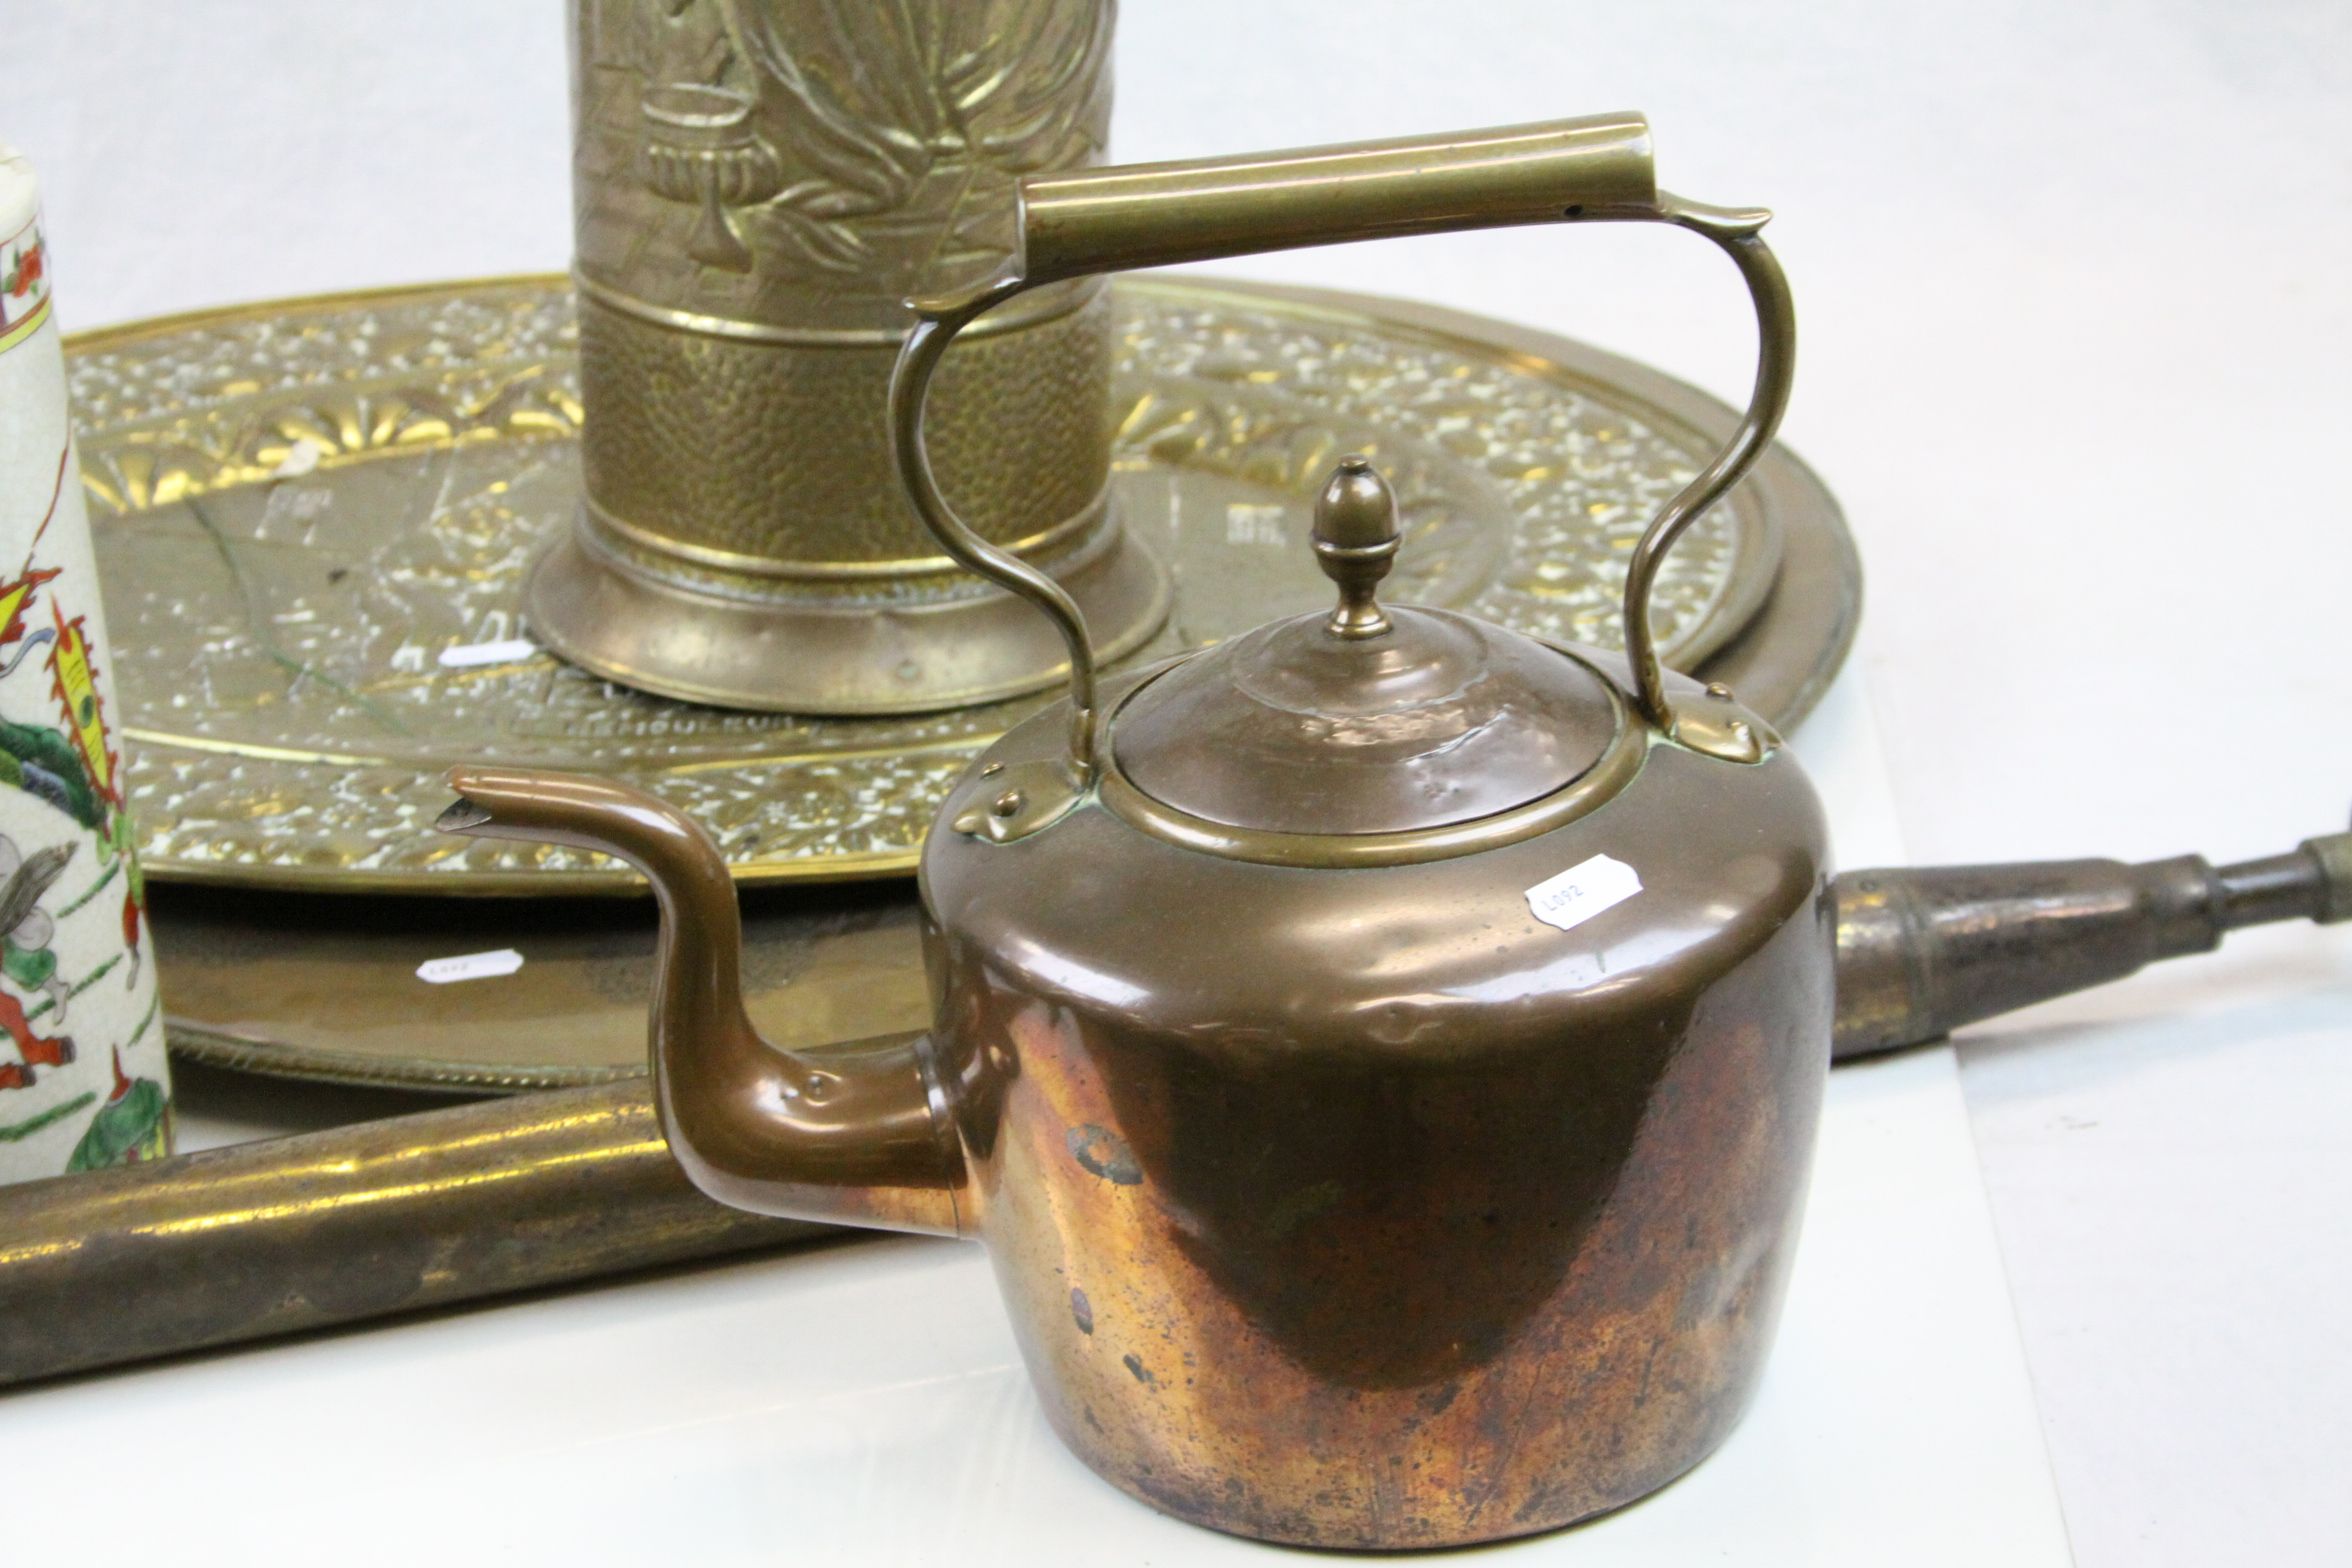 19th Century copper kettle, Carmichael & Co weedkiller sprayer, two brass chargers & a stick stand - Image 2 of 5